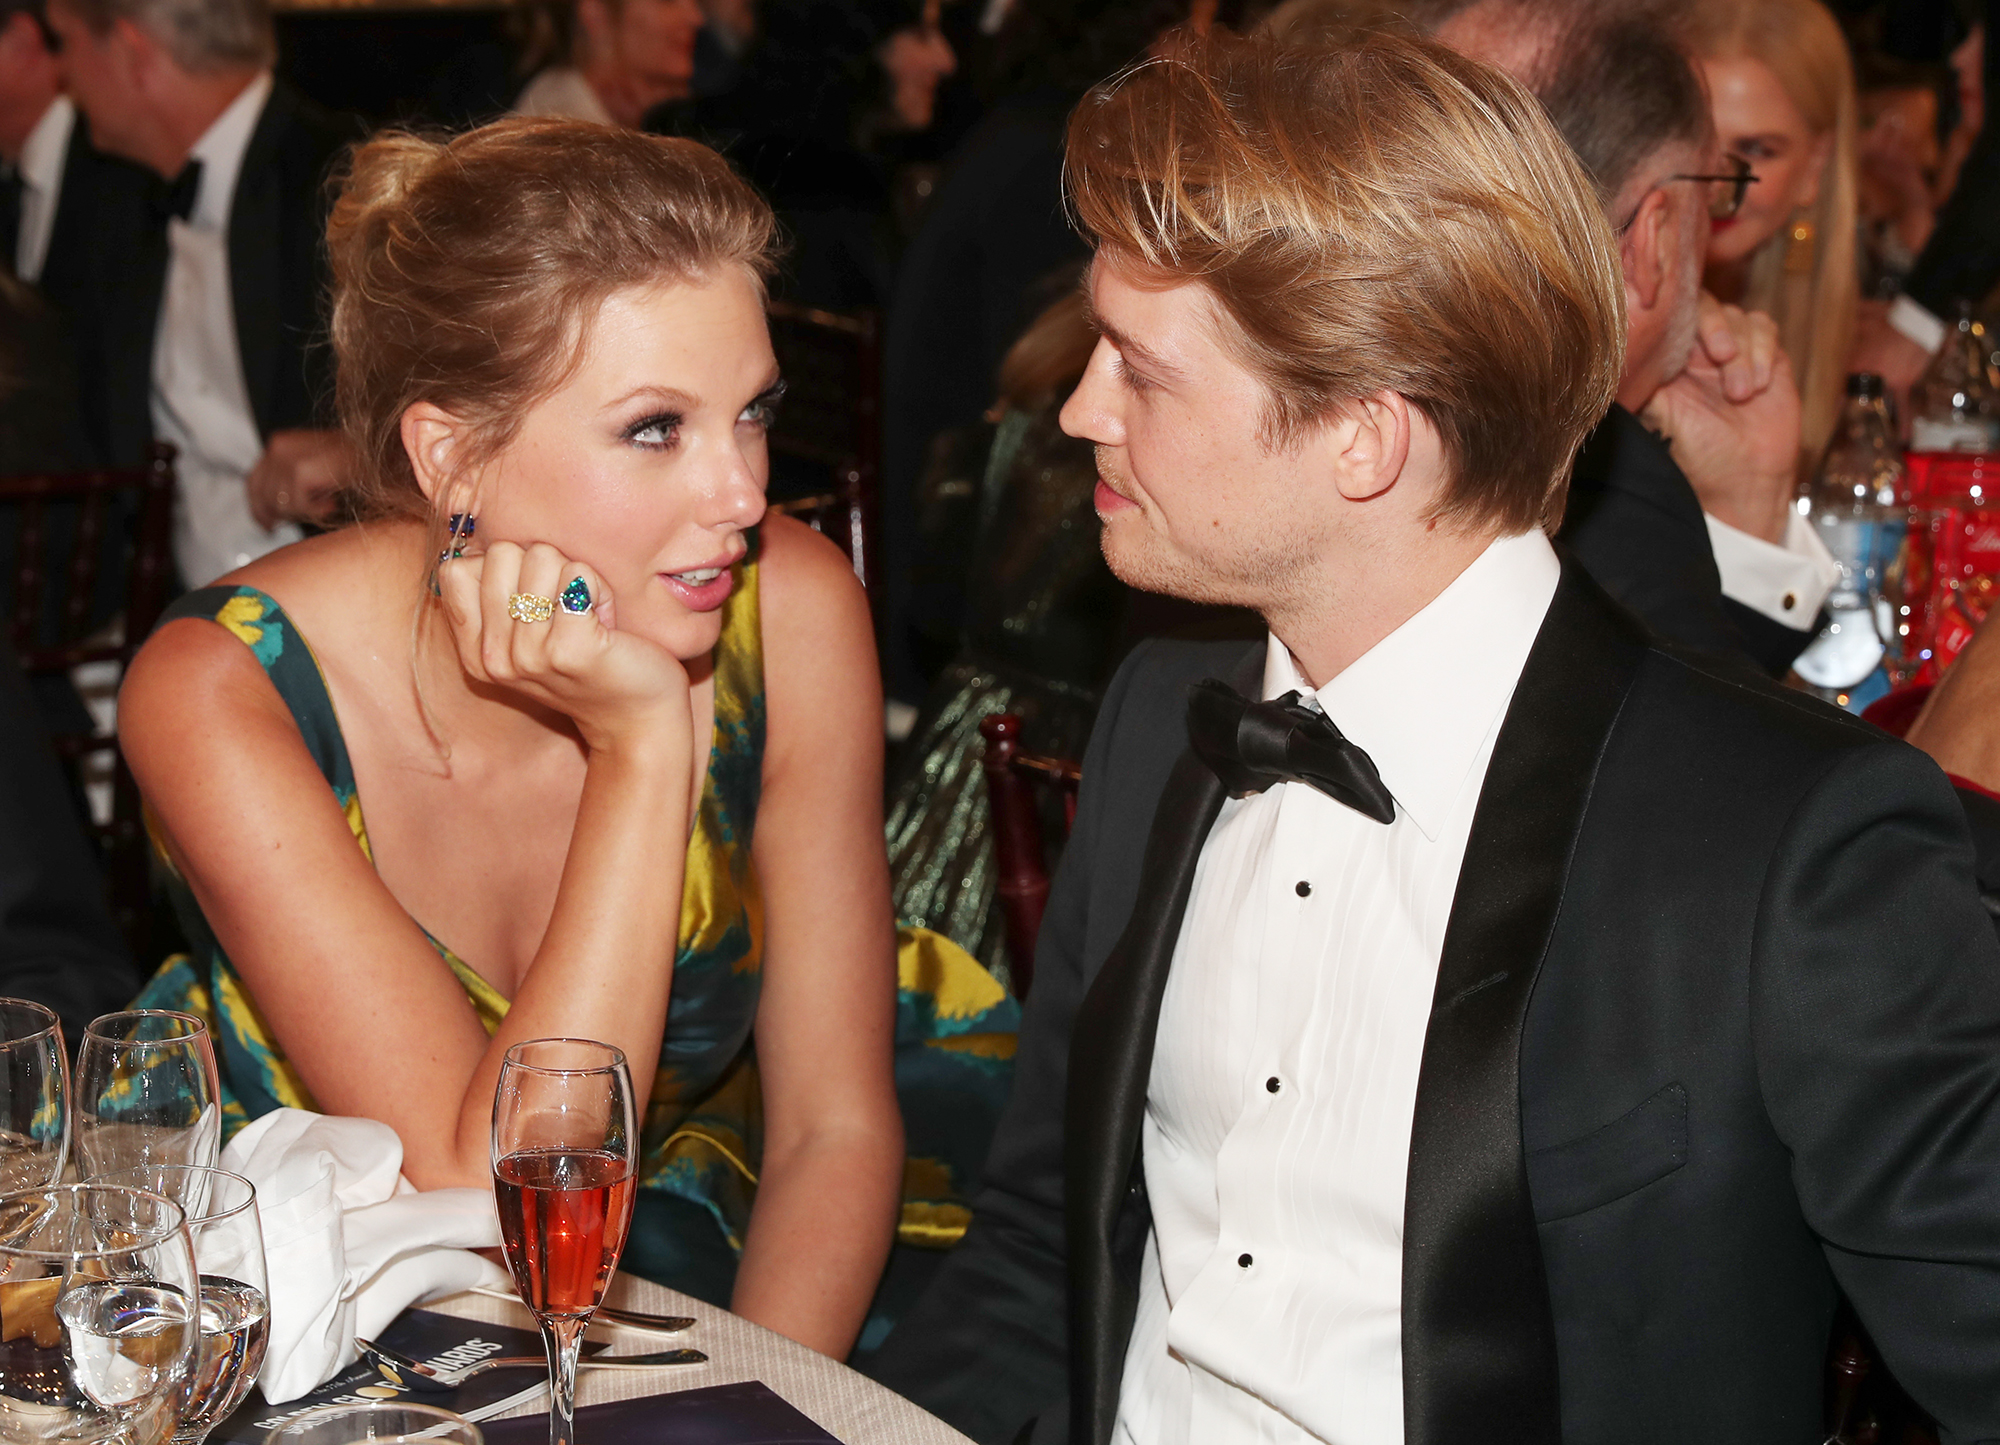 Taylor Swift and Joe Alwyn having a conversation at an event.